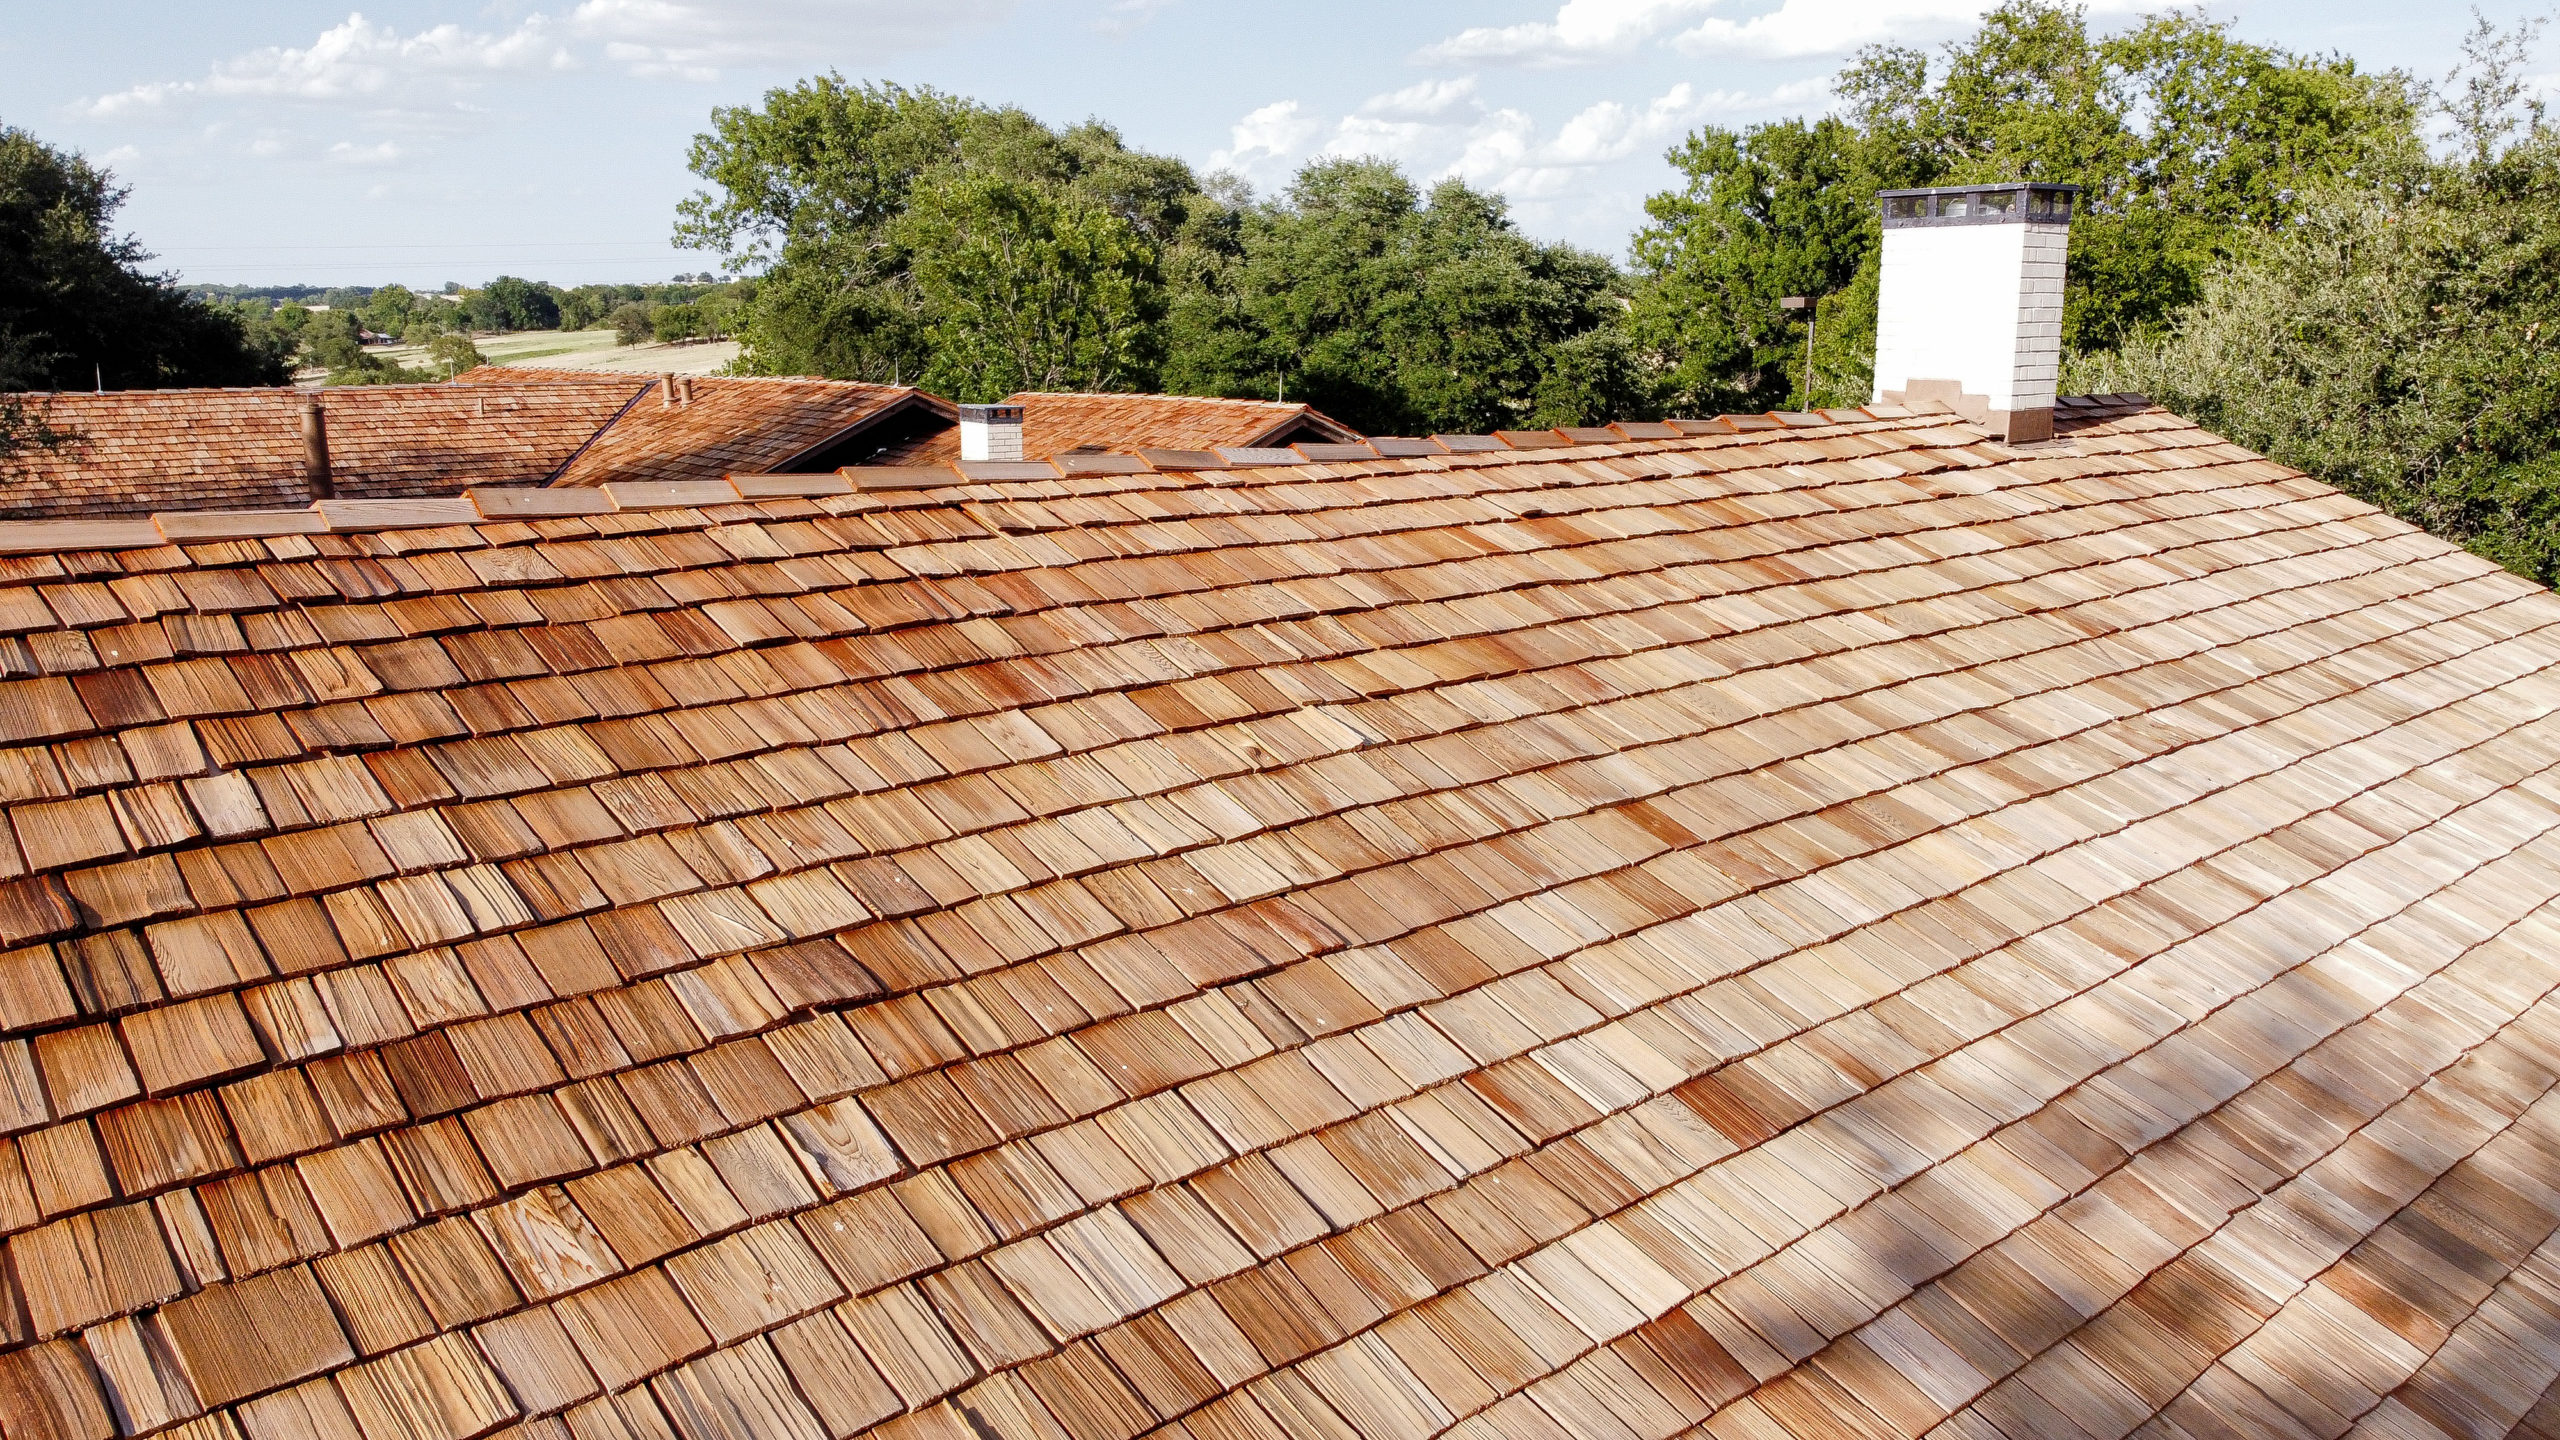 Cedar Wood Shake Roof replaced by Whitish Roofing in Rodger TX and Central Texas roofer.